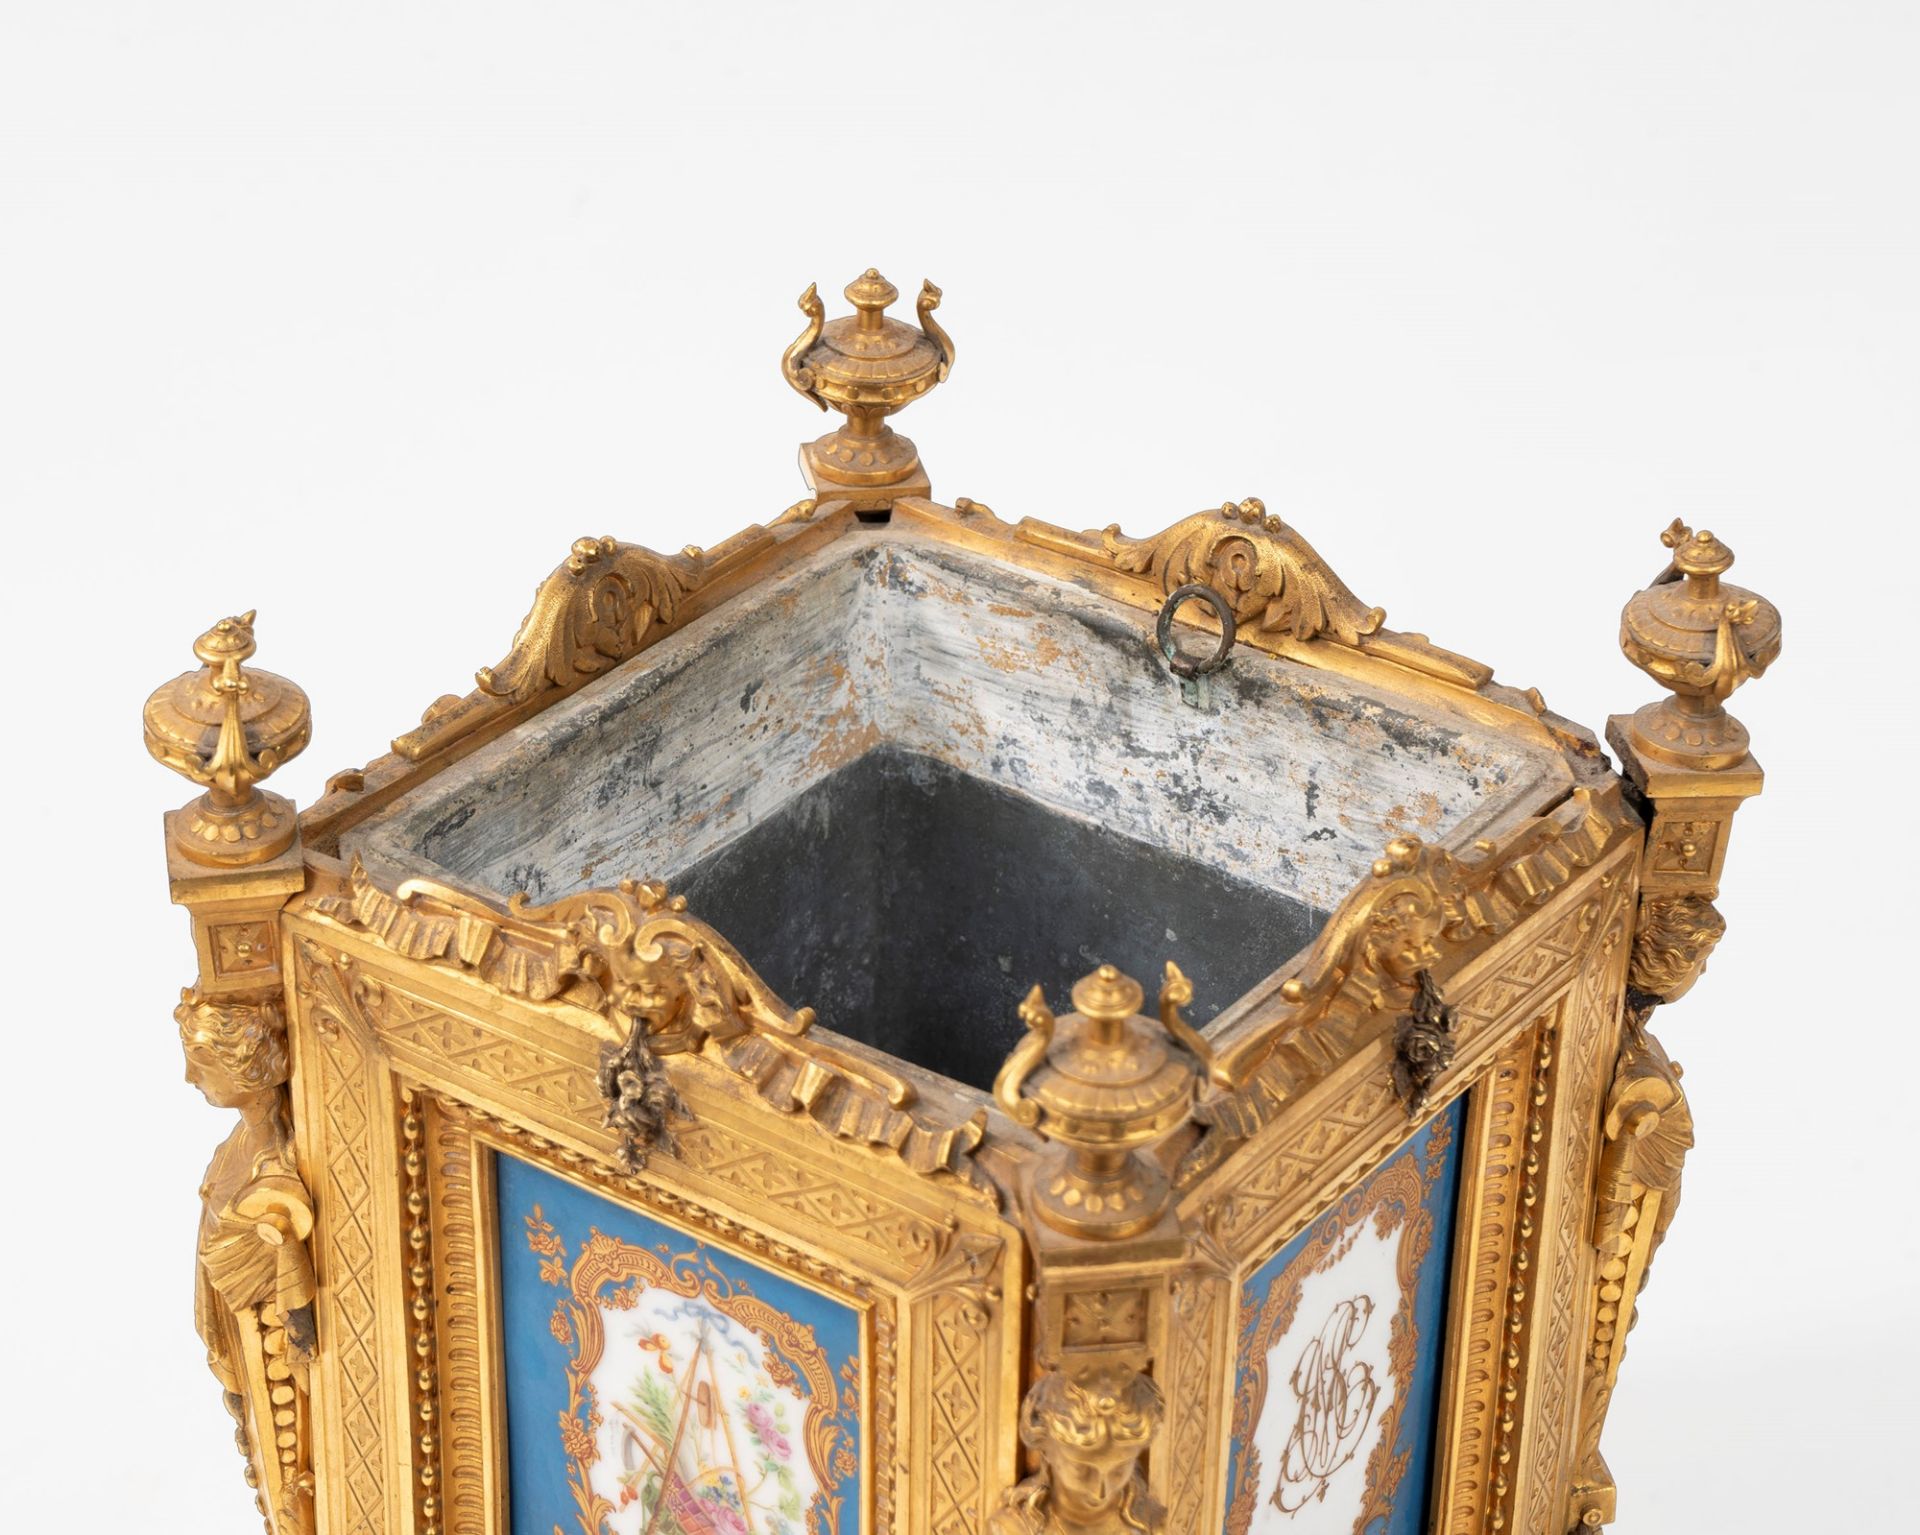 Important Napoleon III jardinier in gilded bronze and porcelain, France, 19th century - Image 7 of 7